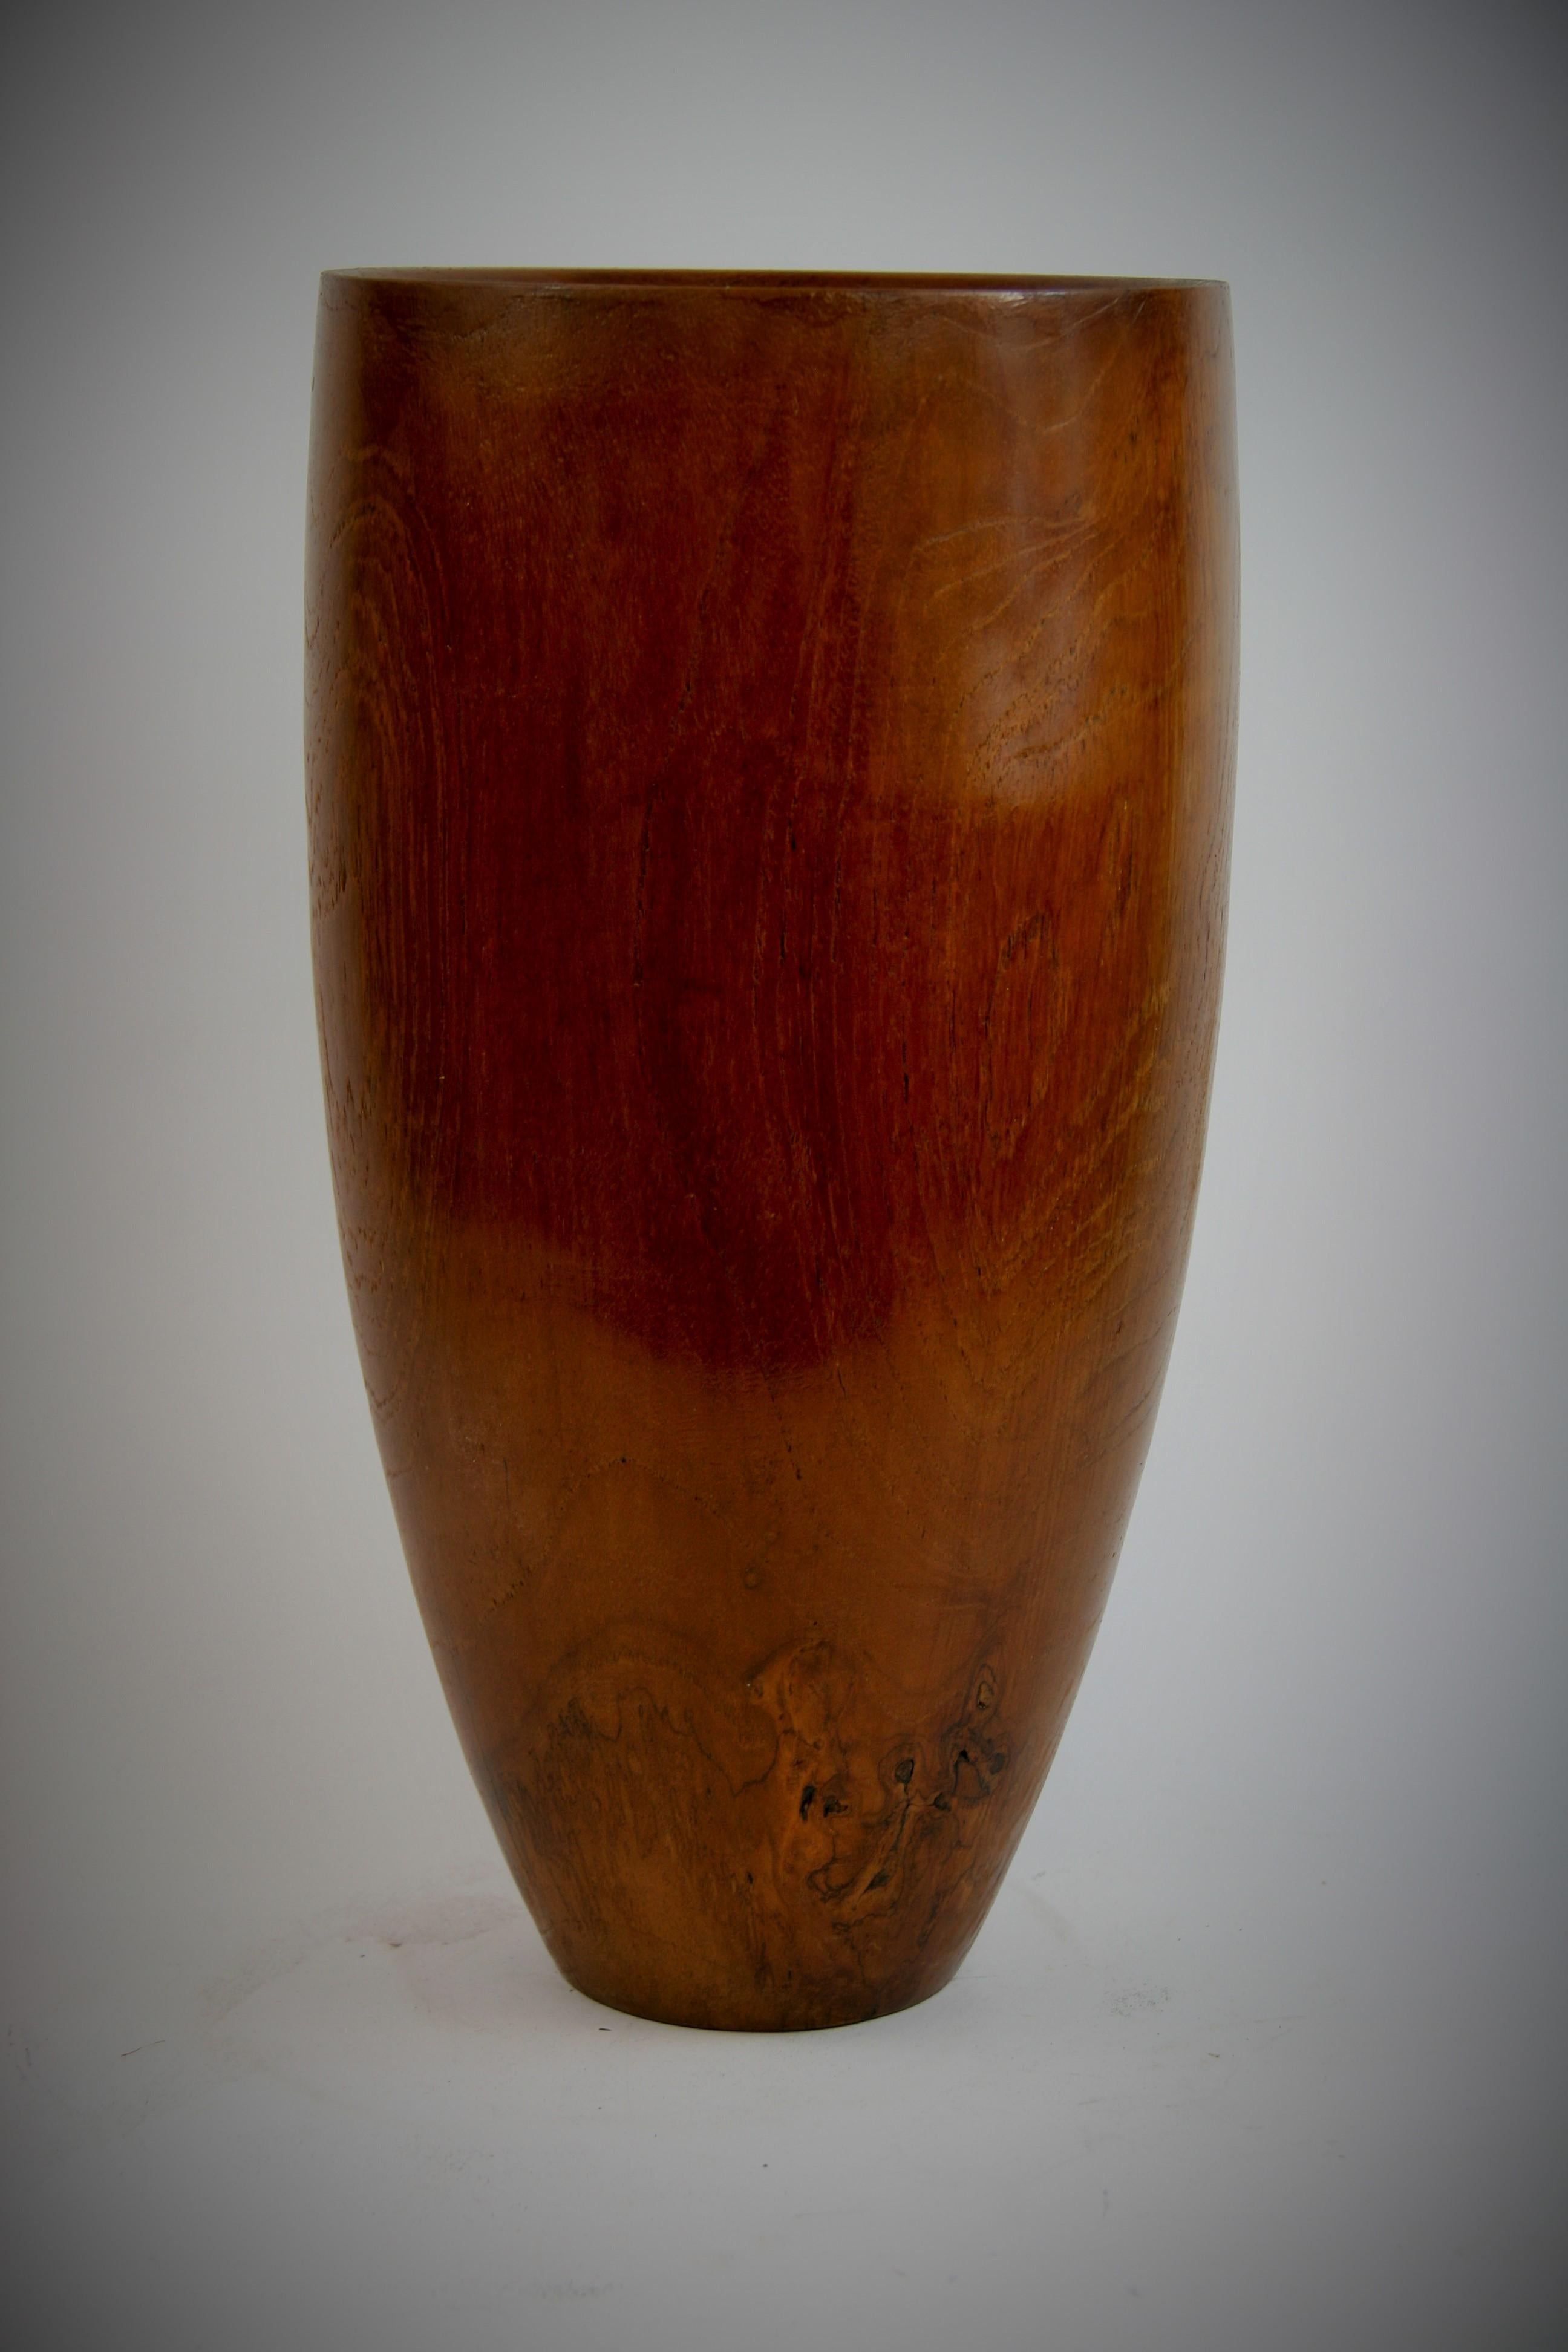 8-285 beautiful hand-turned wood vase from a single block of wood.